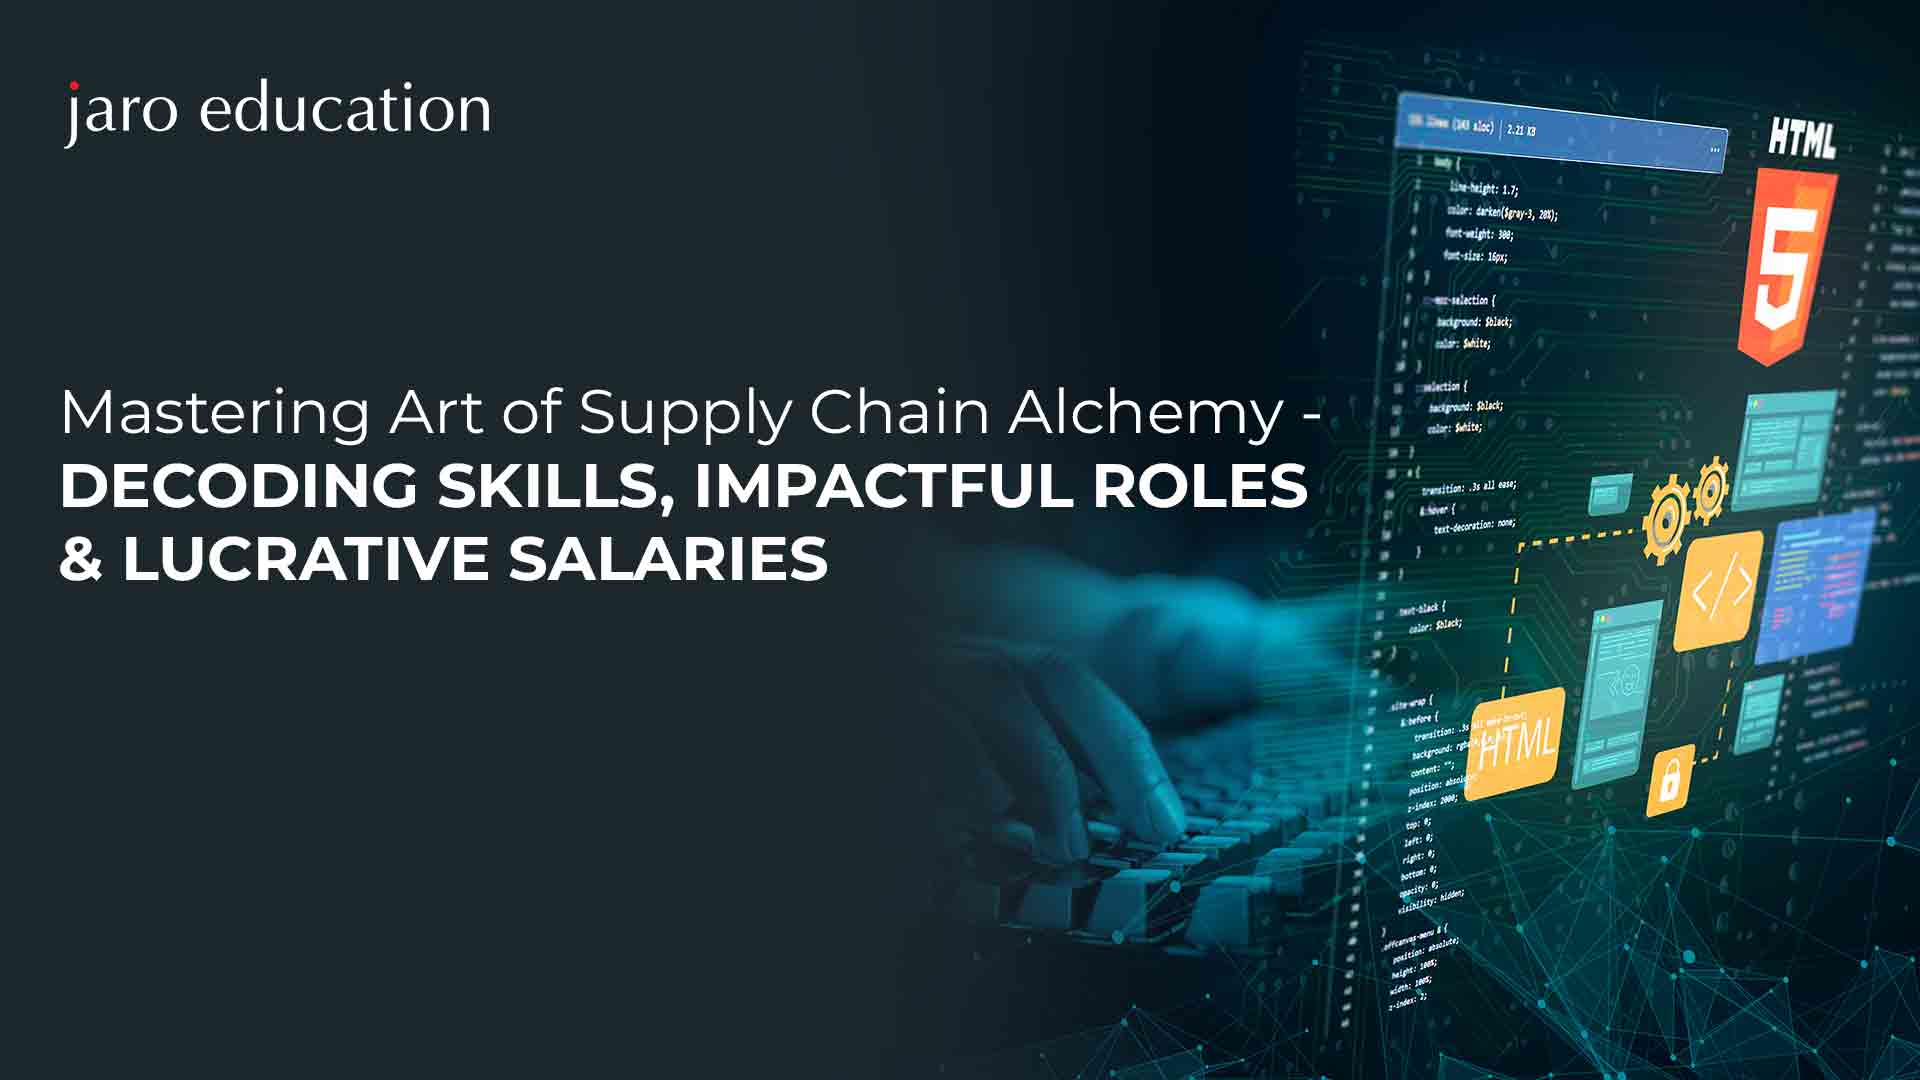 Explore the journey of mastering supply chain alchemy, with a focus on becoming a skilled supply chain analyst—unveiling roles, skills, and lucrative salaries.